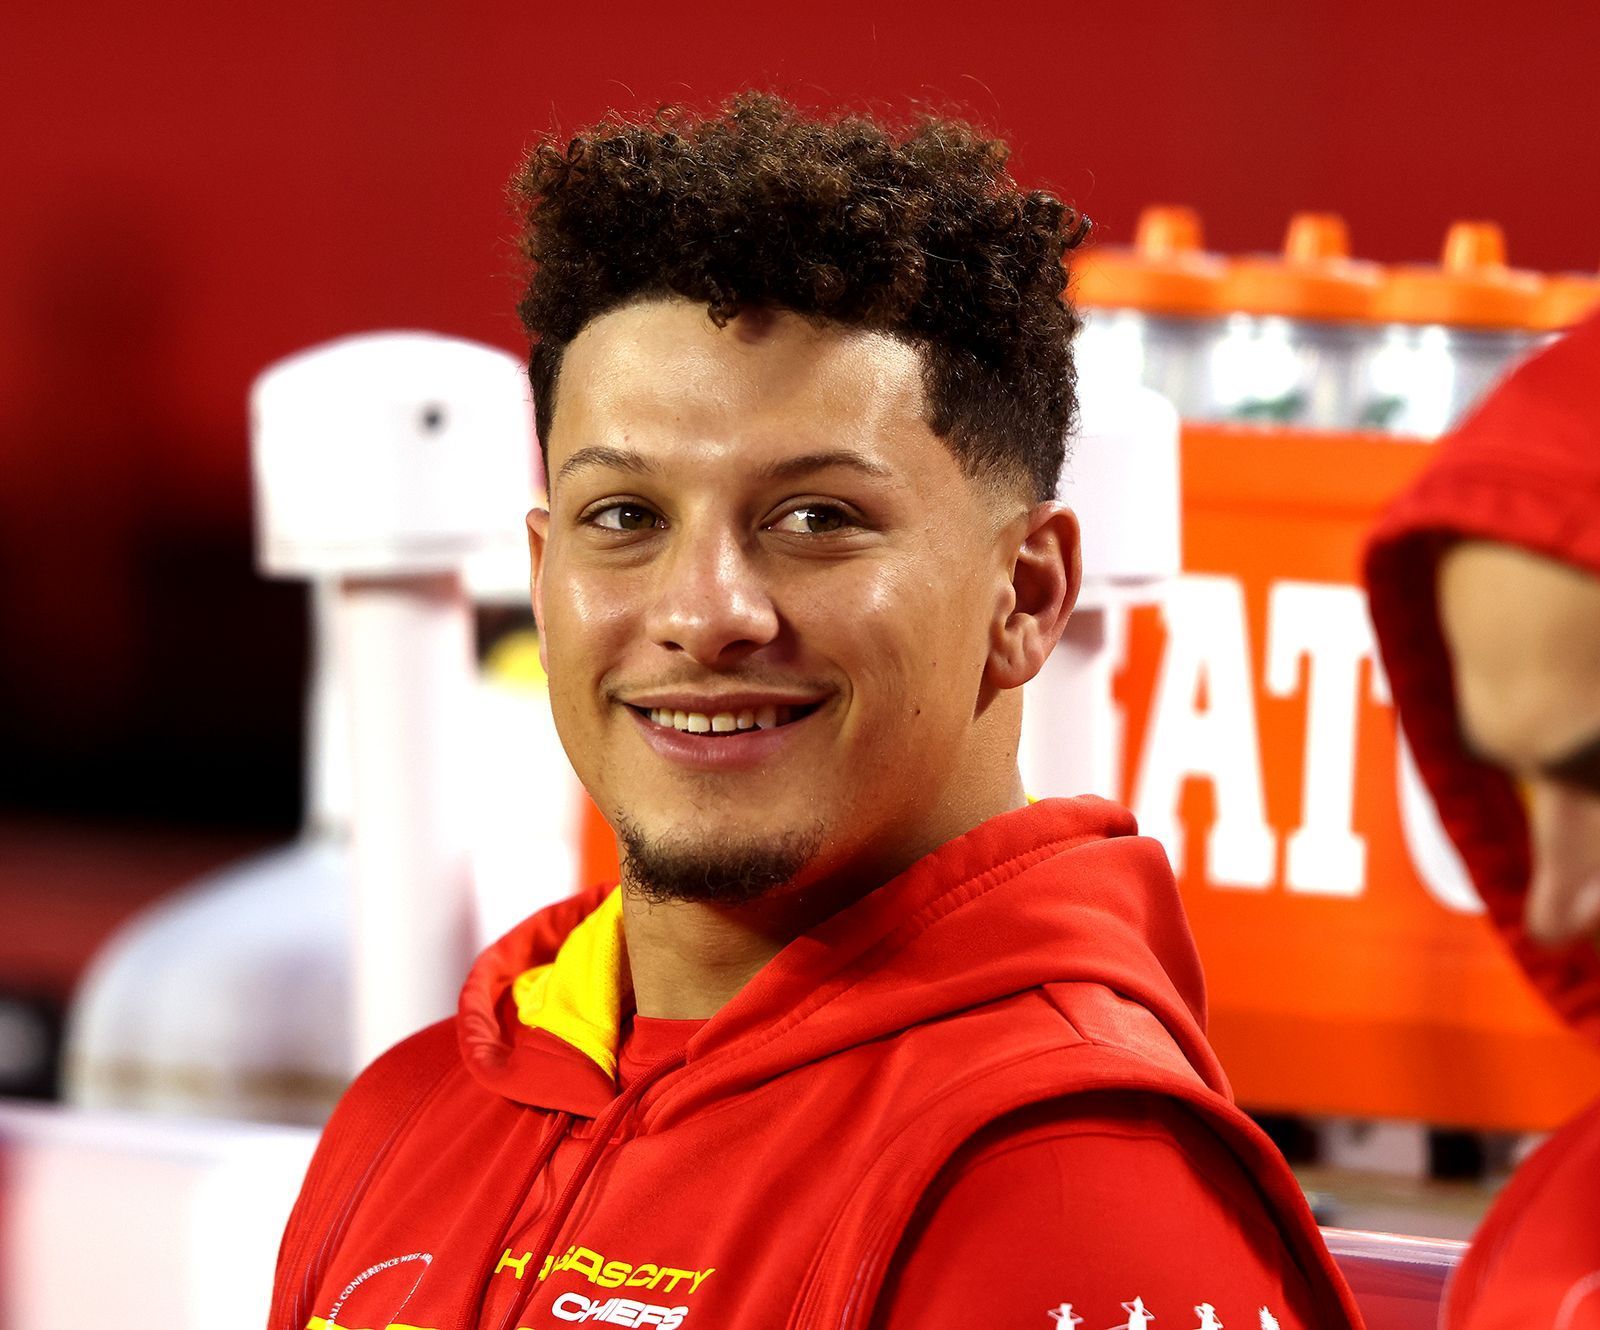 Patrick mahomes found dead in house